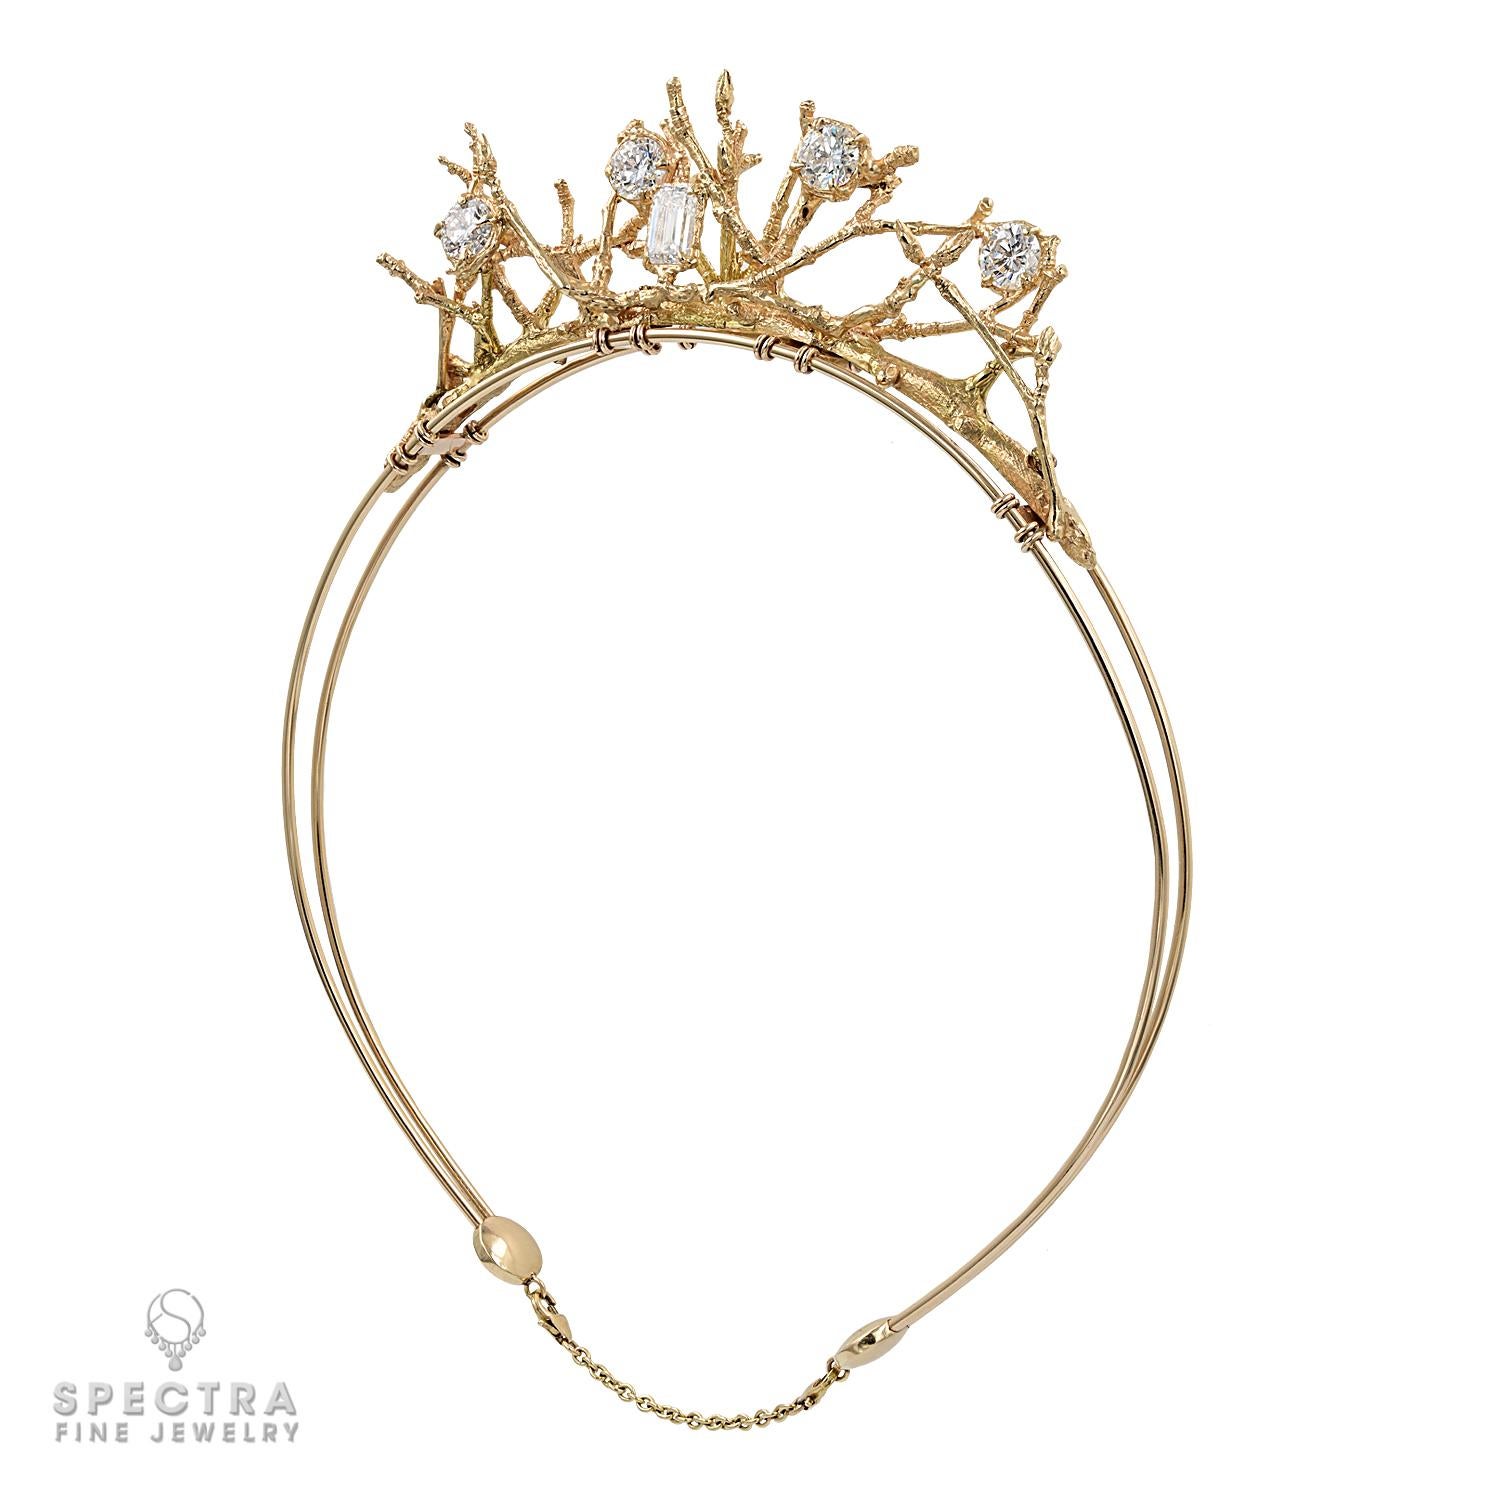 Introducing the epitome of elegance and luxury, the Diamond Gold Tiara with a mesmerizing 'Twig' design. Crafted to perfection, this exceptional piece of jewelry is a fusion of nature's beauty and exquisite craftsmanship. Made from a blend of 14k